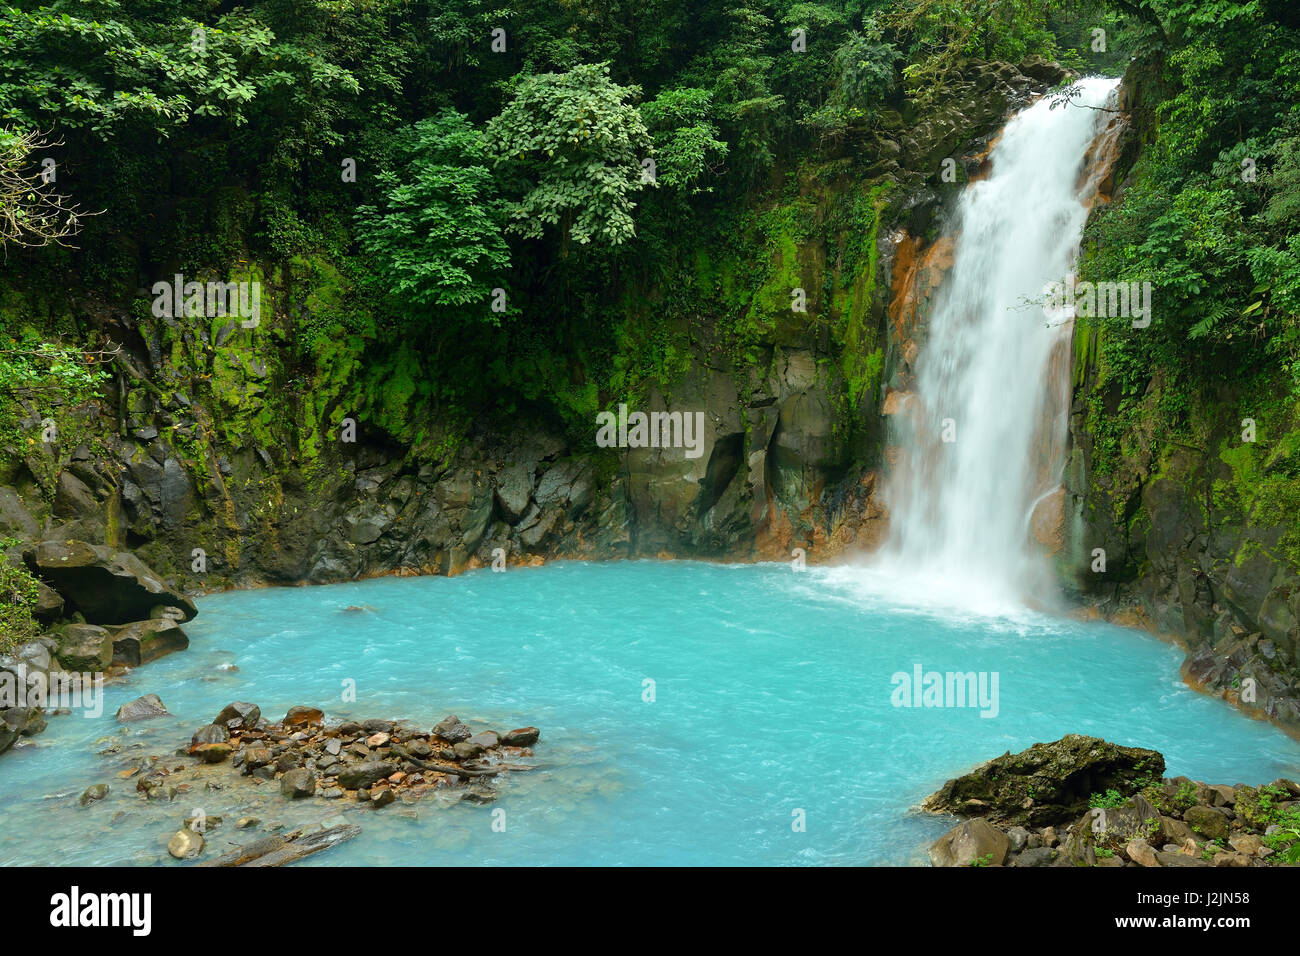 Waterfall with the blue waters of the Rio Celeste in Volcán Tenorio National Park, Costa Rica, Central America Stock Photo